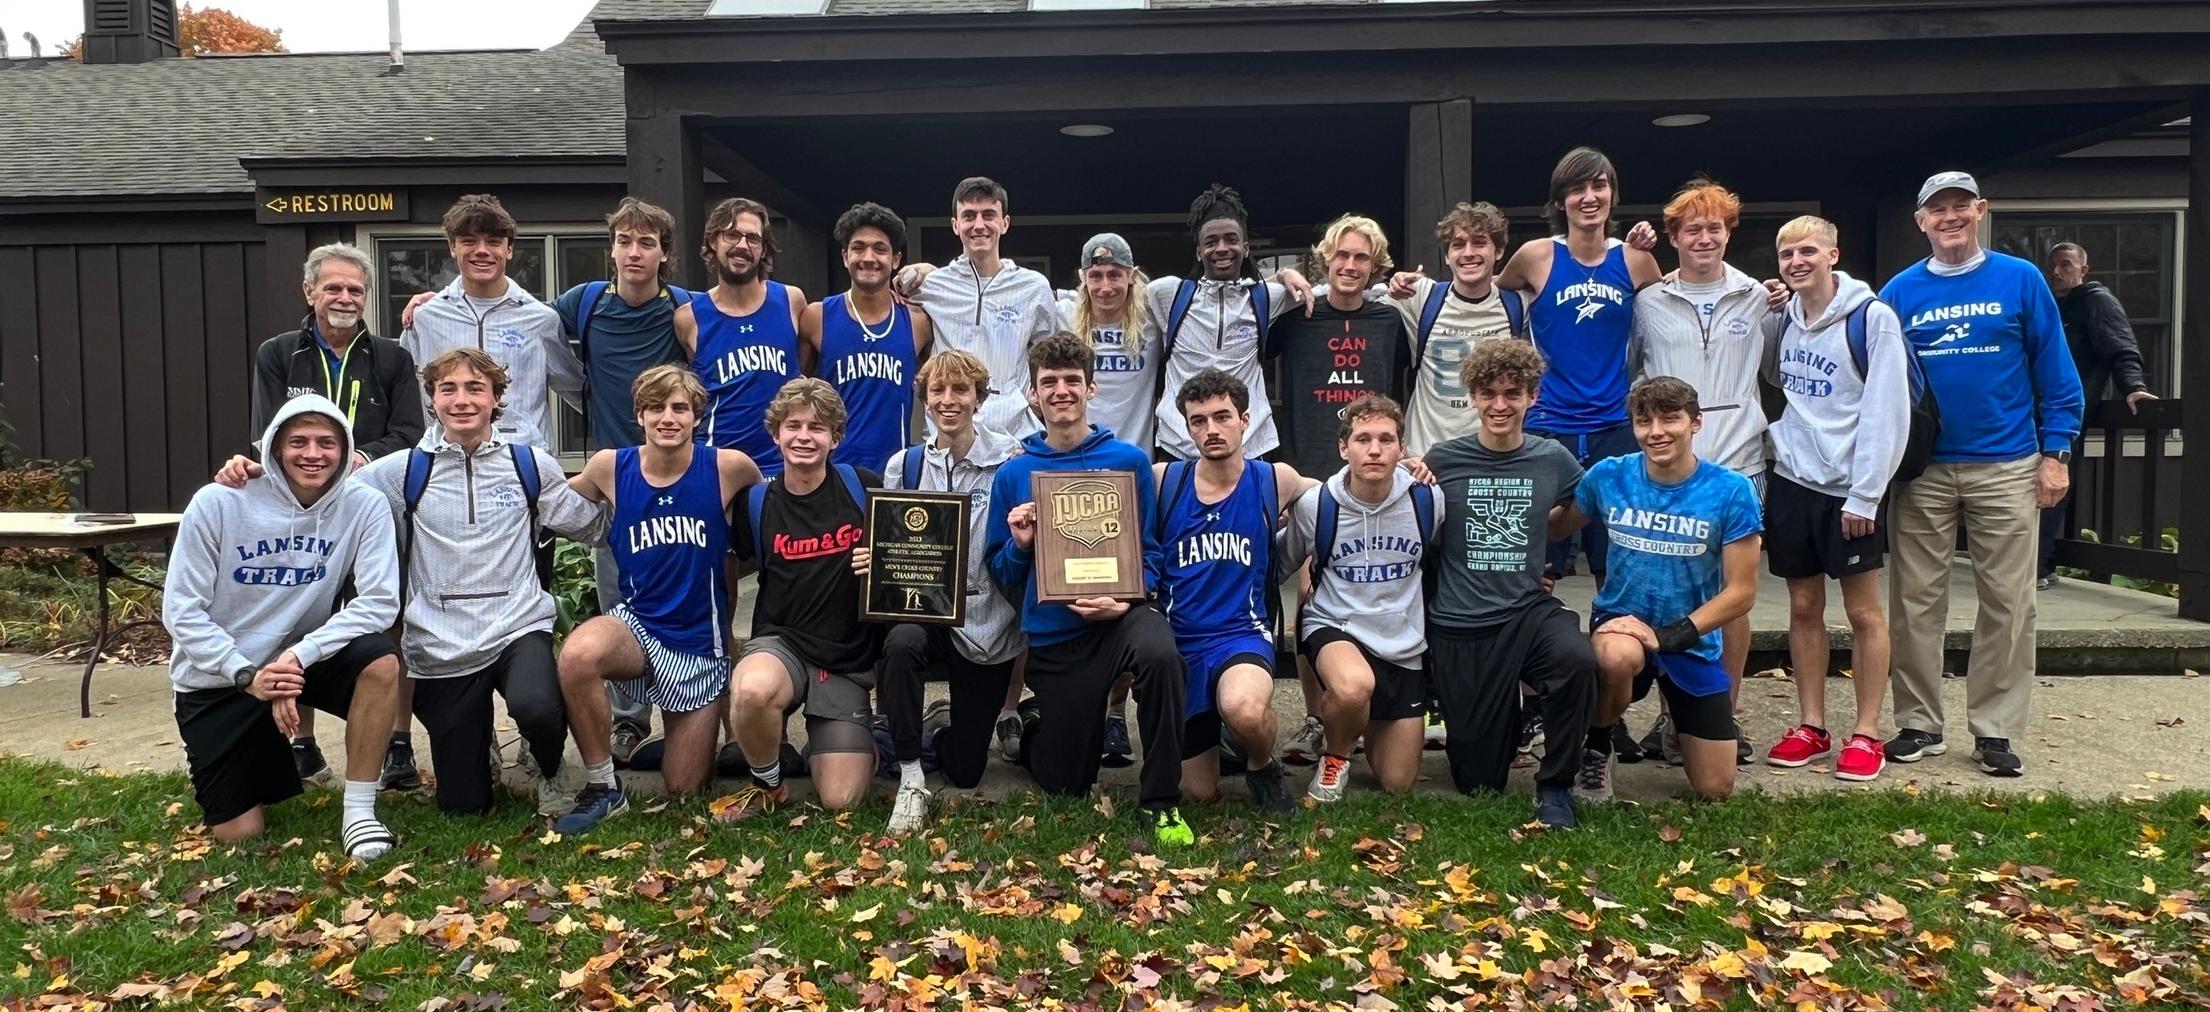 Stars Continue to Shine! Lansing Remains on Top of Region 12 Division II Men’s Cross Country Scene